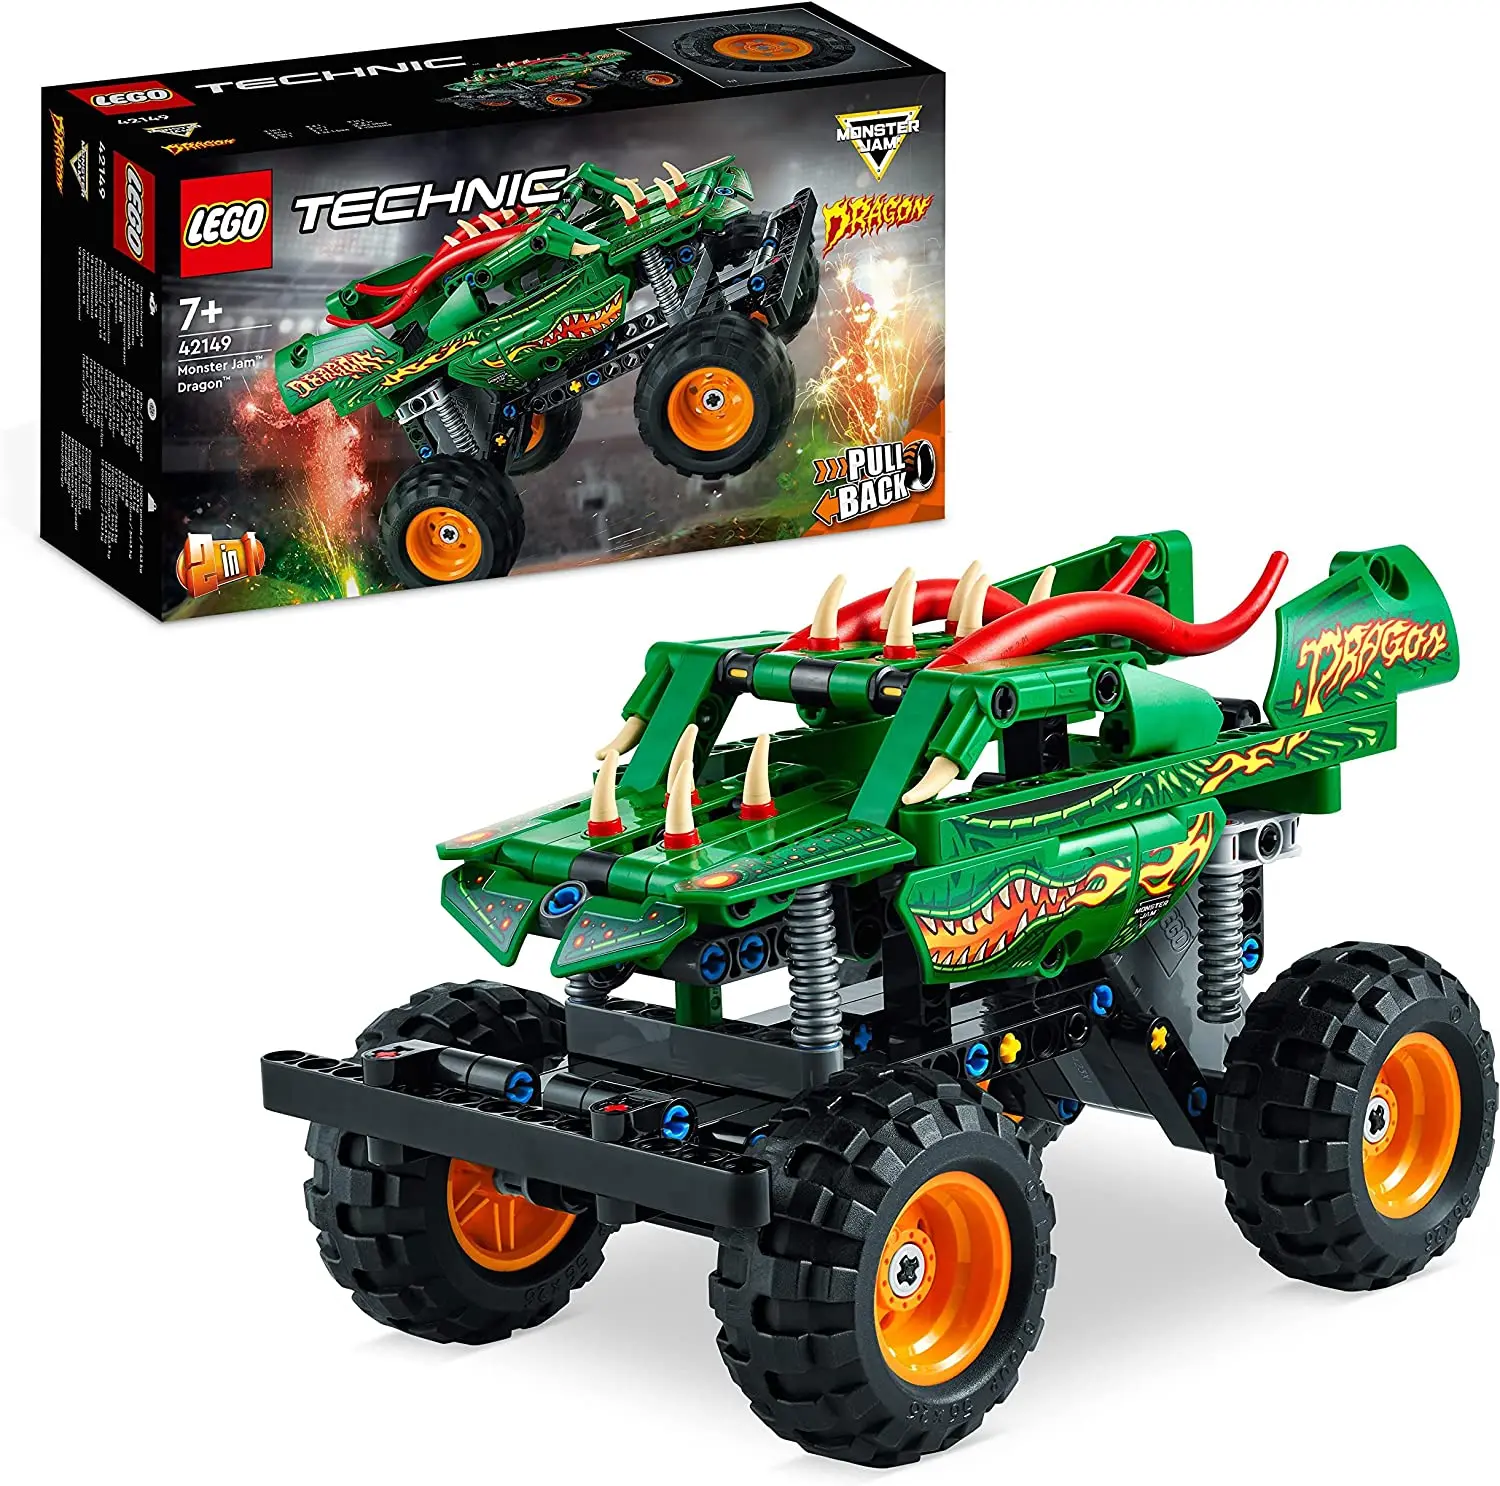 

Lego 42149 Technic Monster Jam Dragon Monster Truck Toy for Boys and Girls, 2in1 Racing Pull Back Car Toys for Off Road Stunts